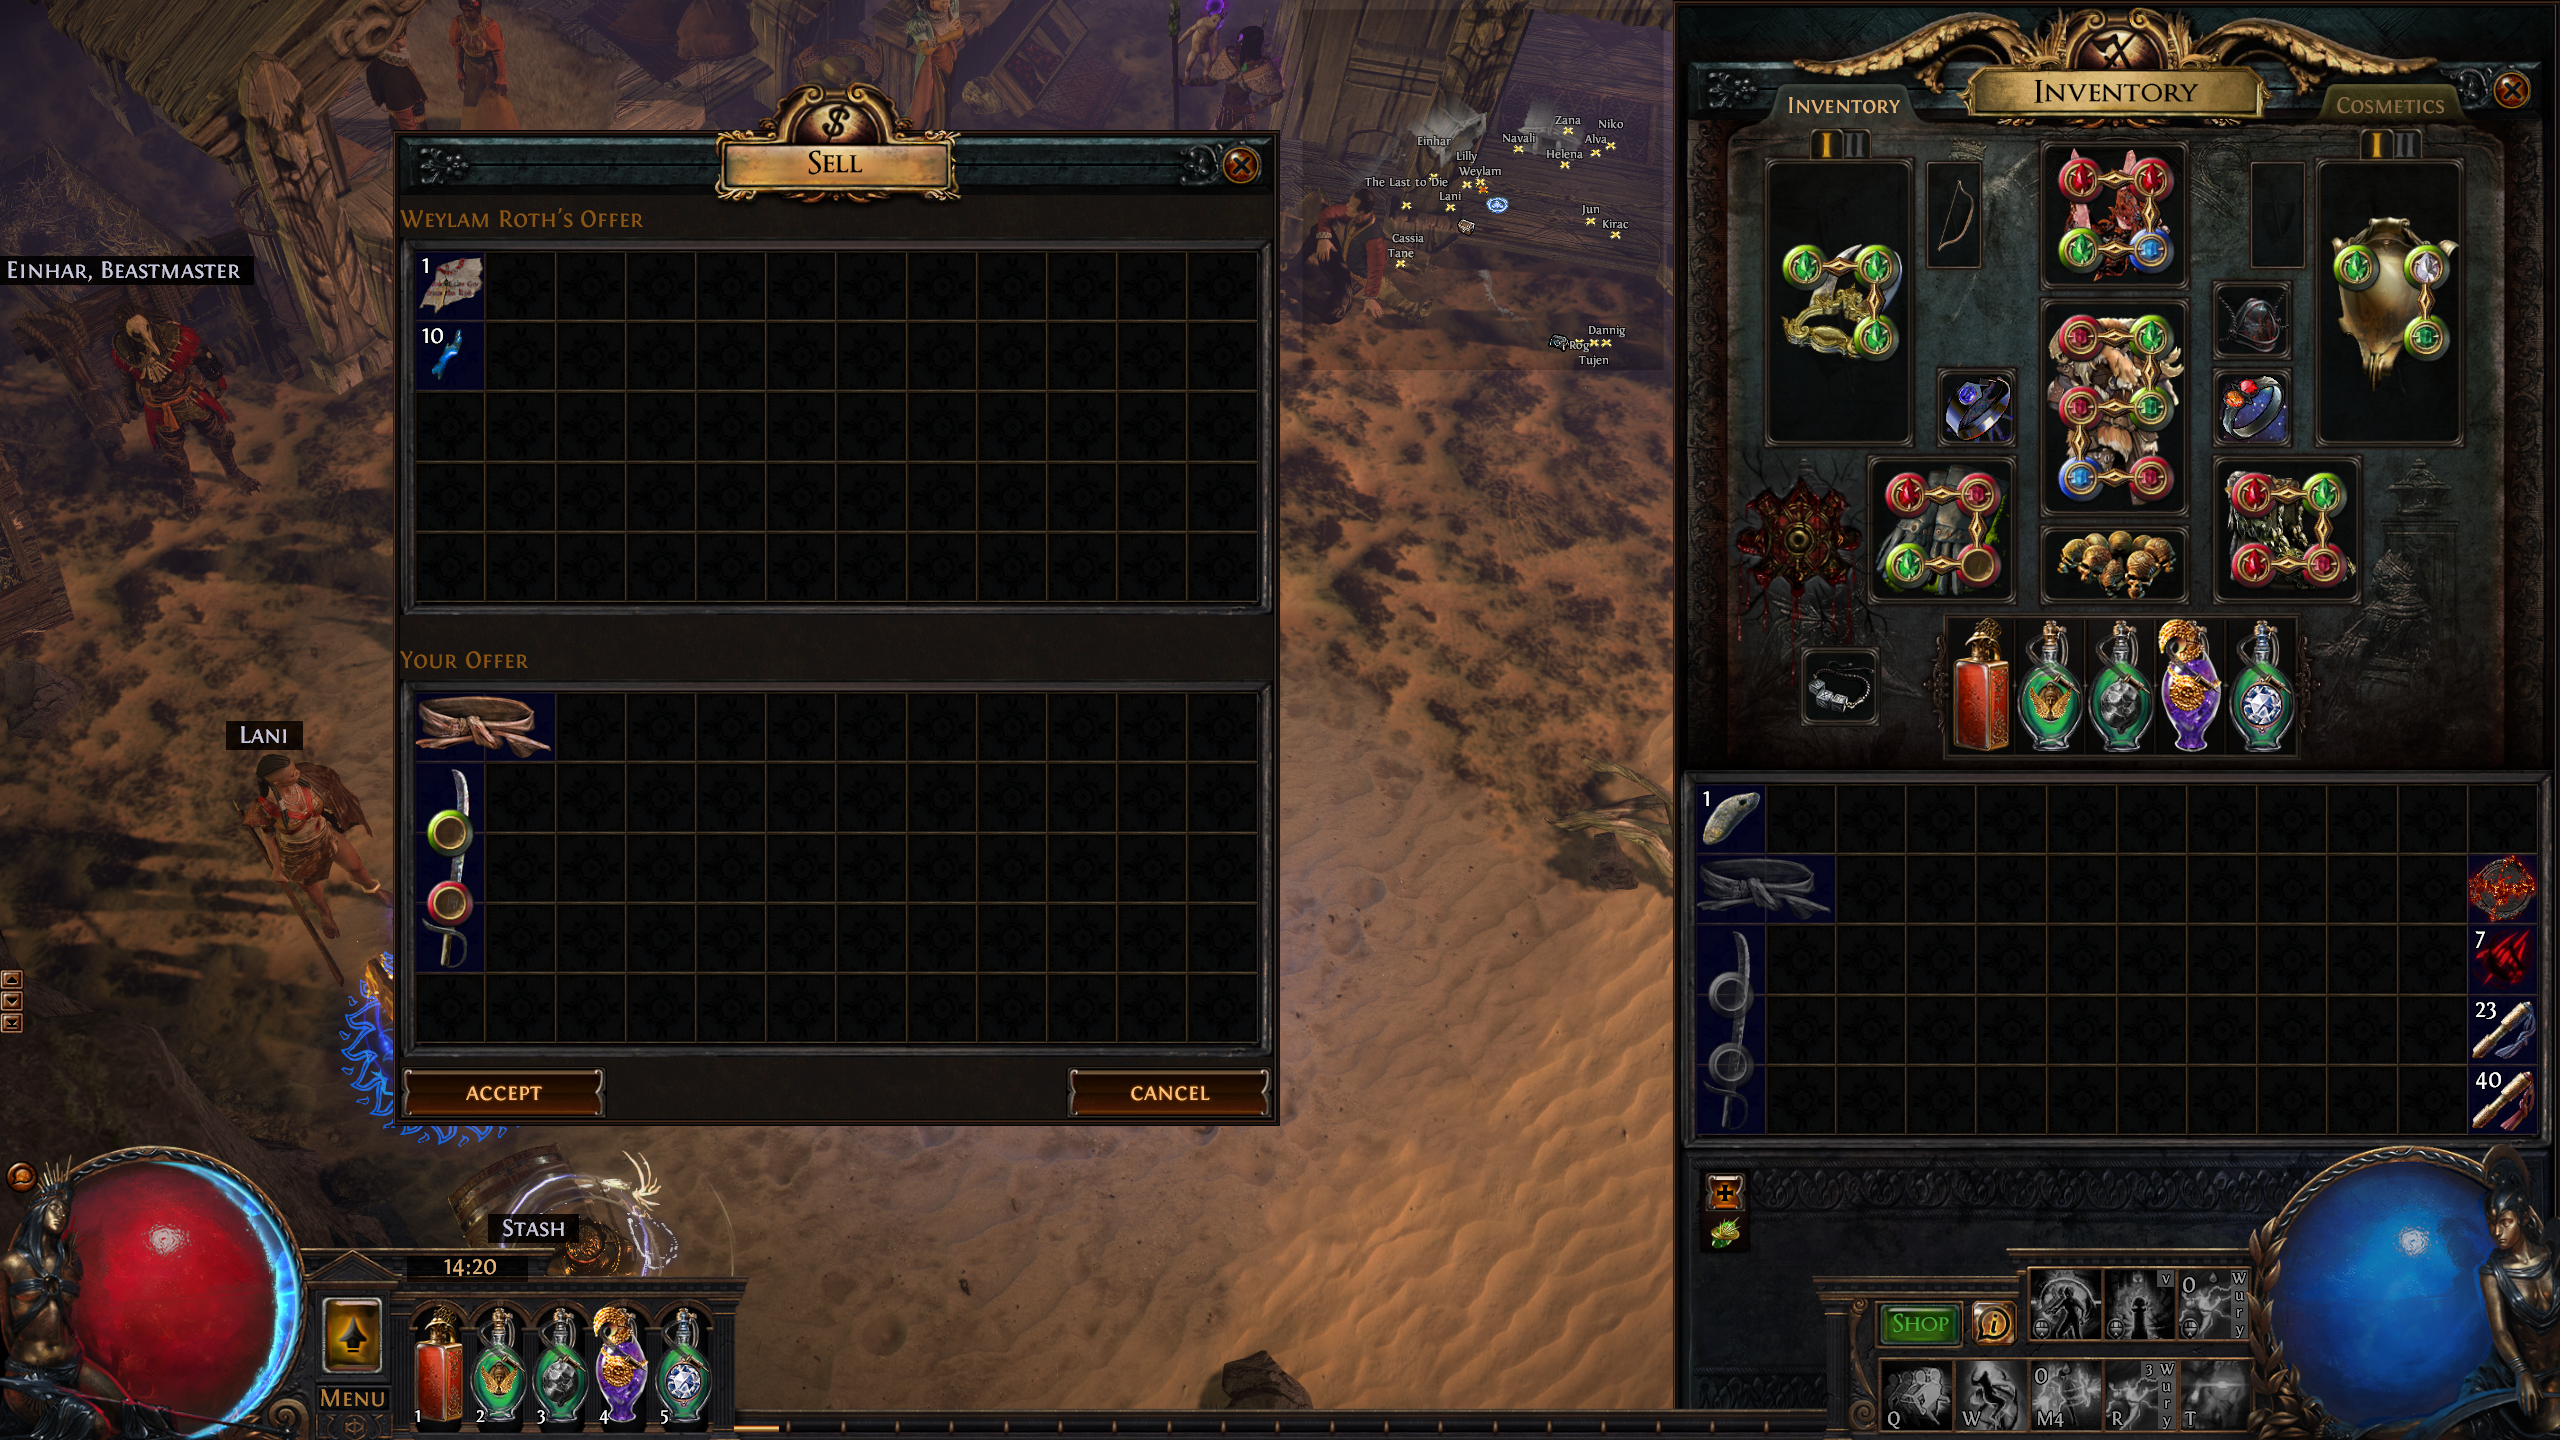 An example of an incorrect vendor recipe in Path of Exile, returning only currency shards